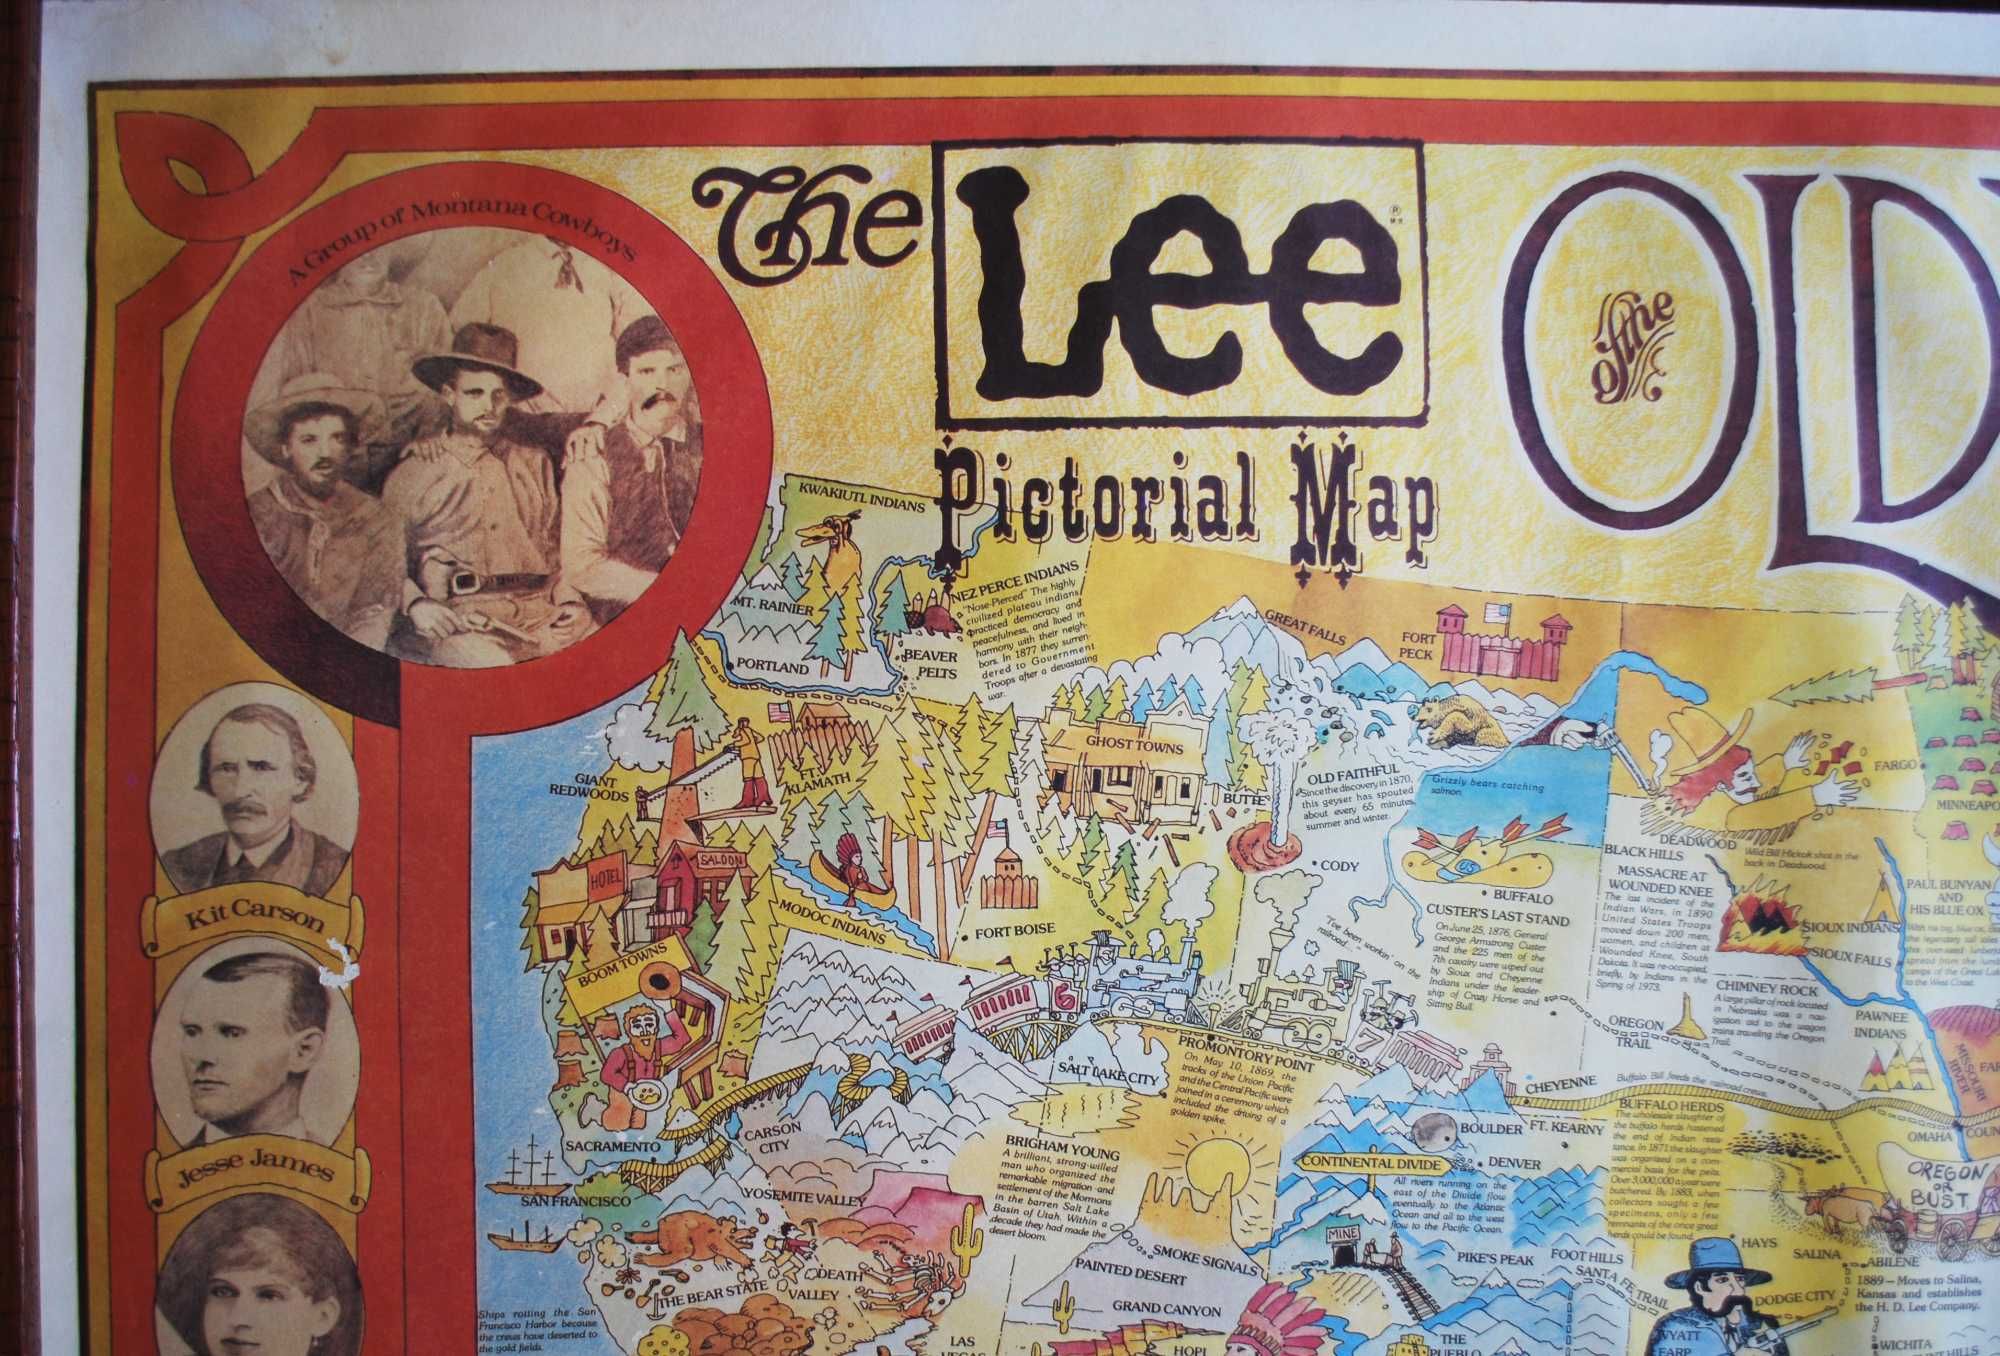 Cartaz/Poster The Lee Pictorial Map Old West